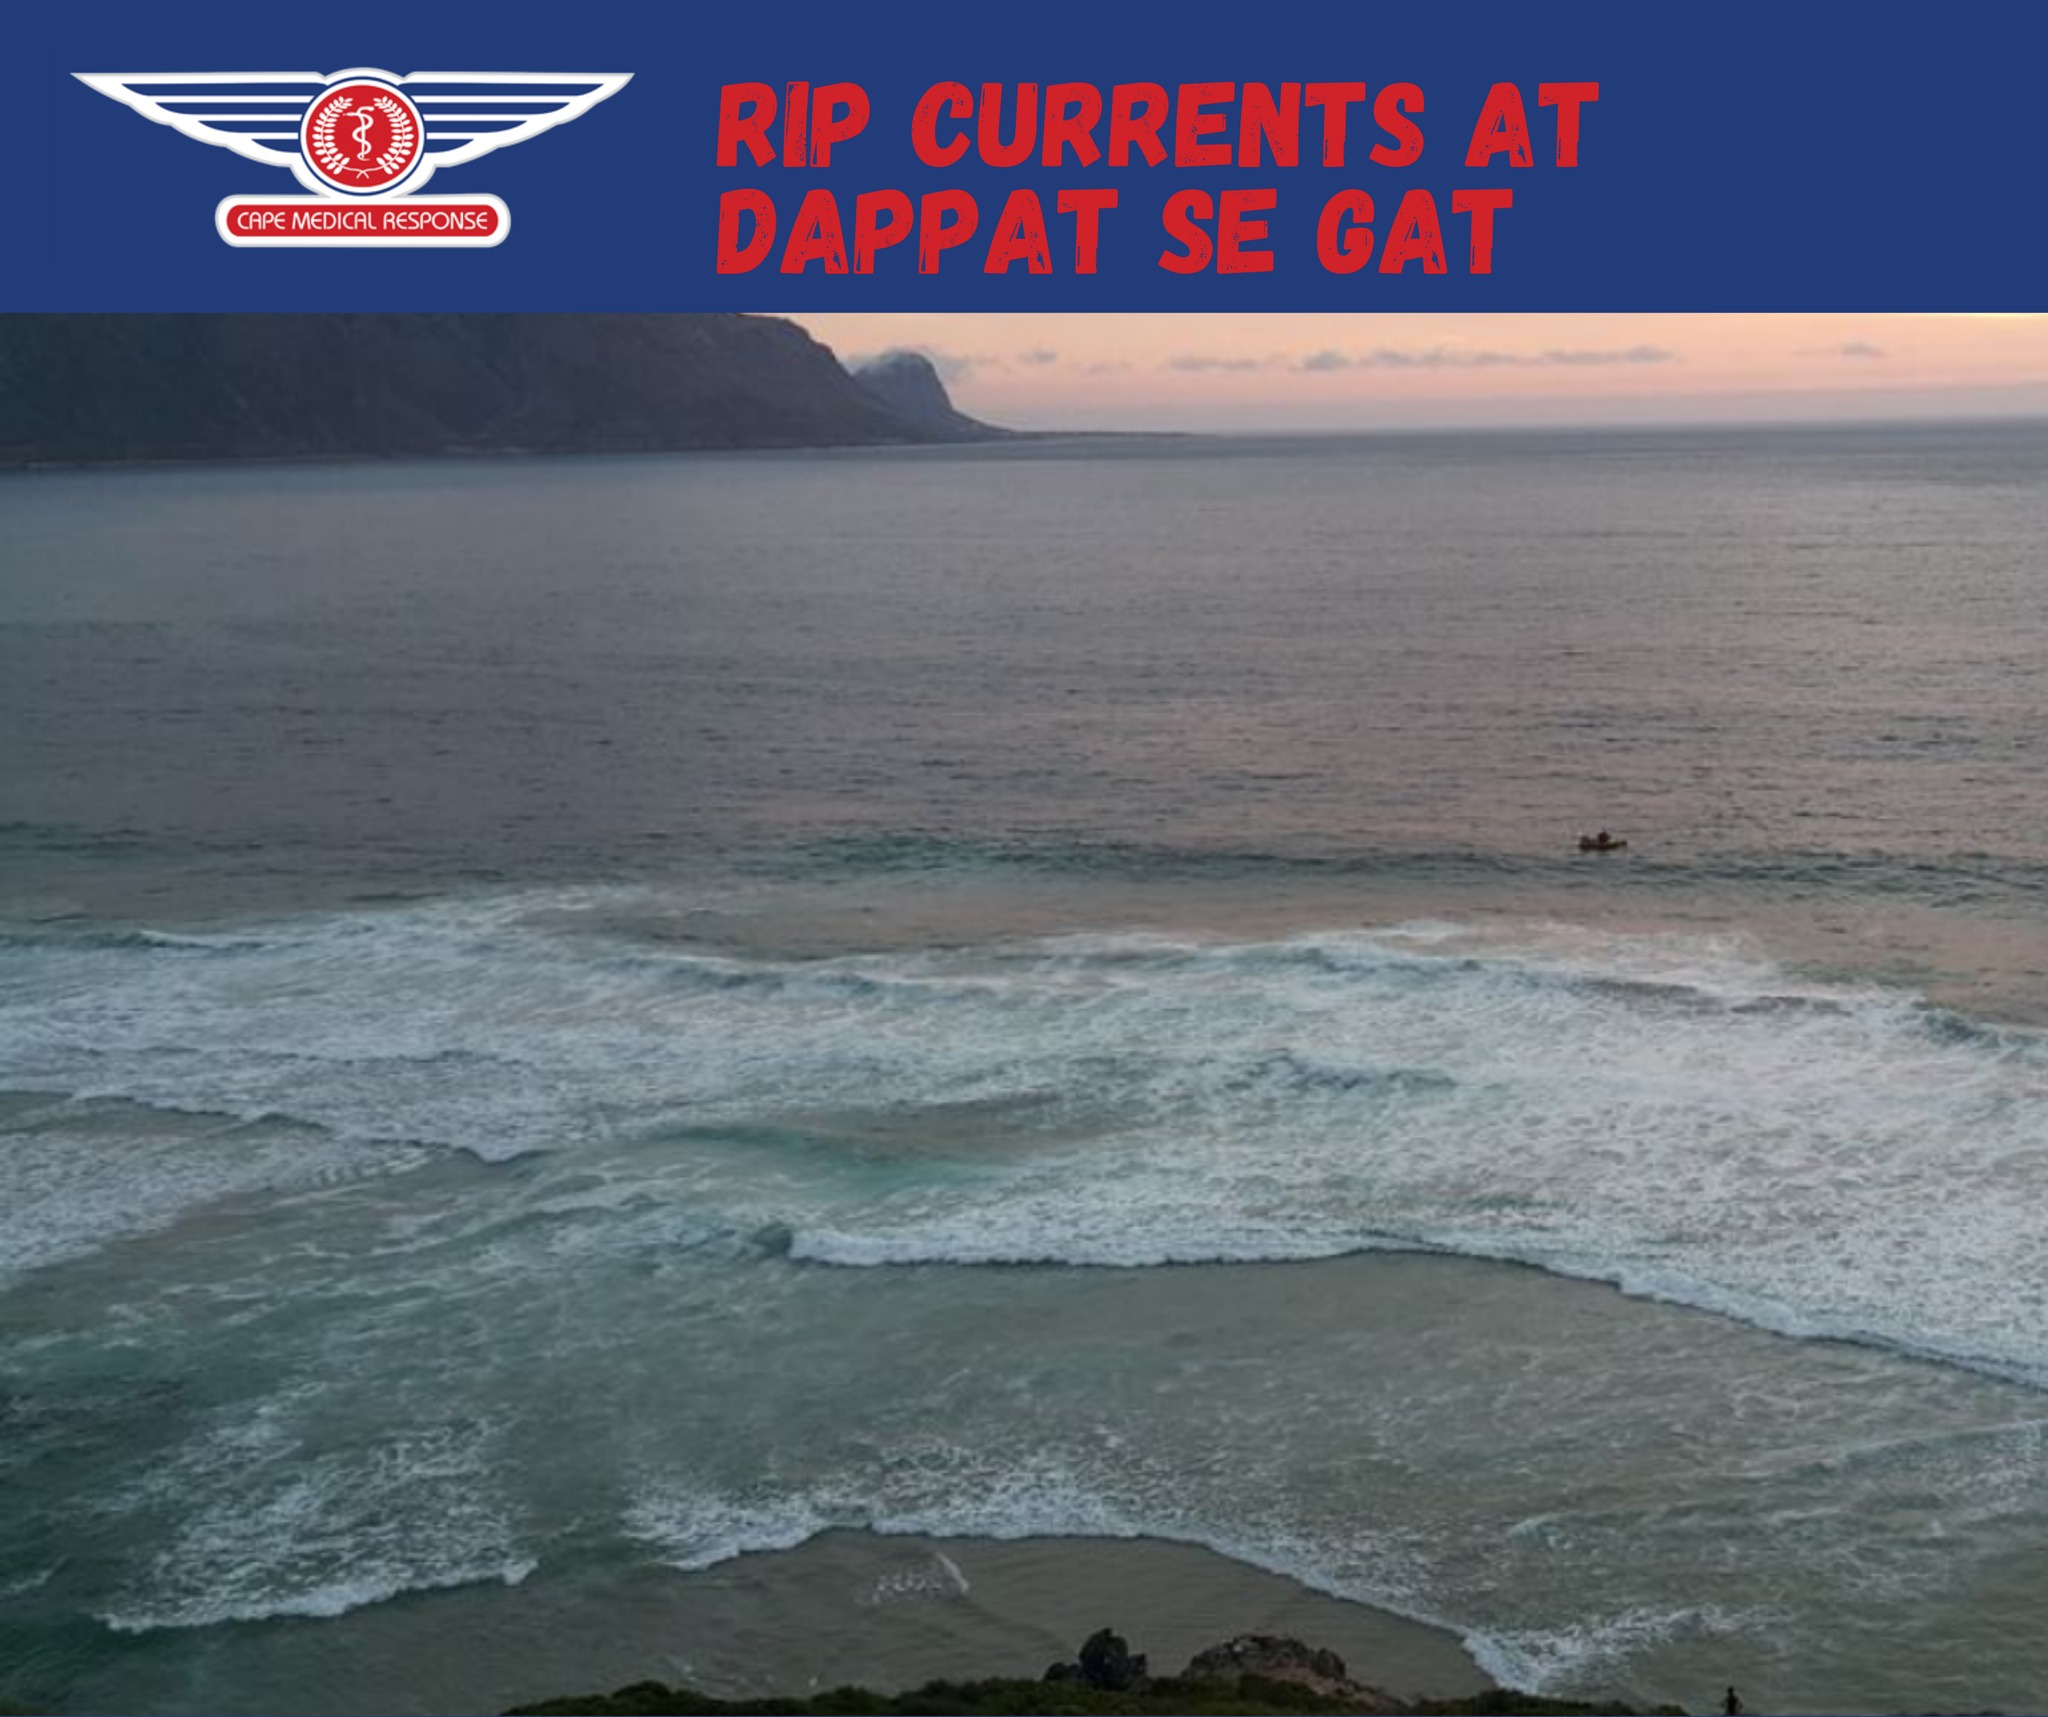 Know more about the extreme dangers of rip tides/ rip currents